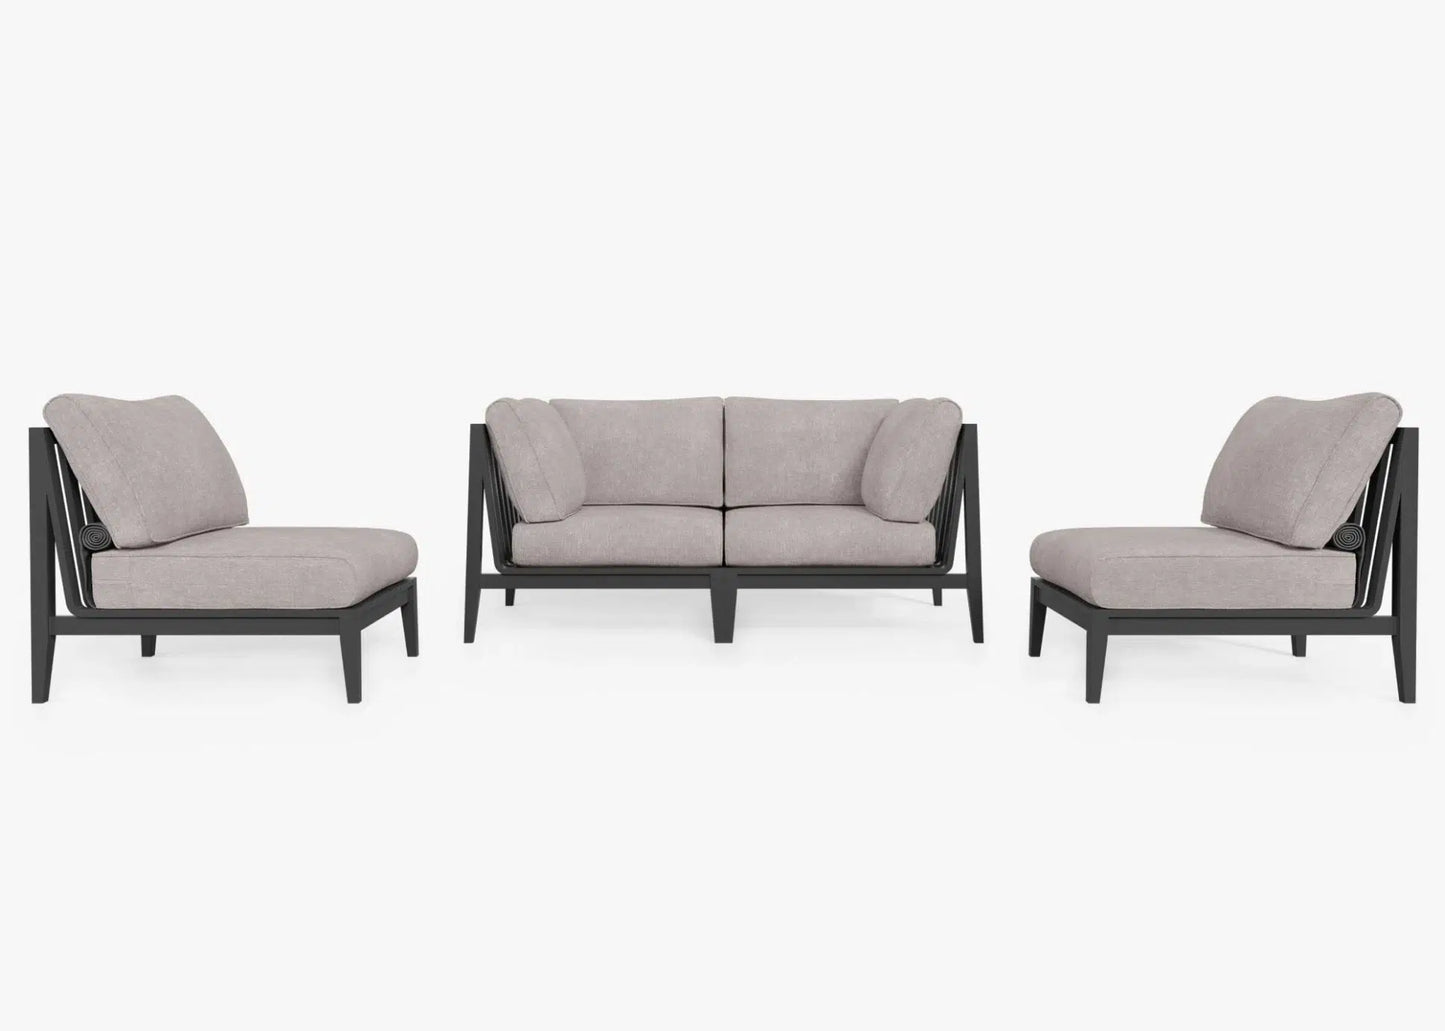 Live Outer 69" Charcoal Aluminum Outdoor Loveseat With Armless Chairs and Sandstone Gray Cushion (4-Seat)